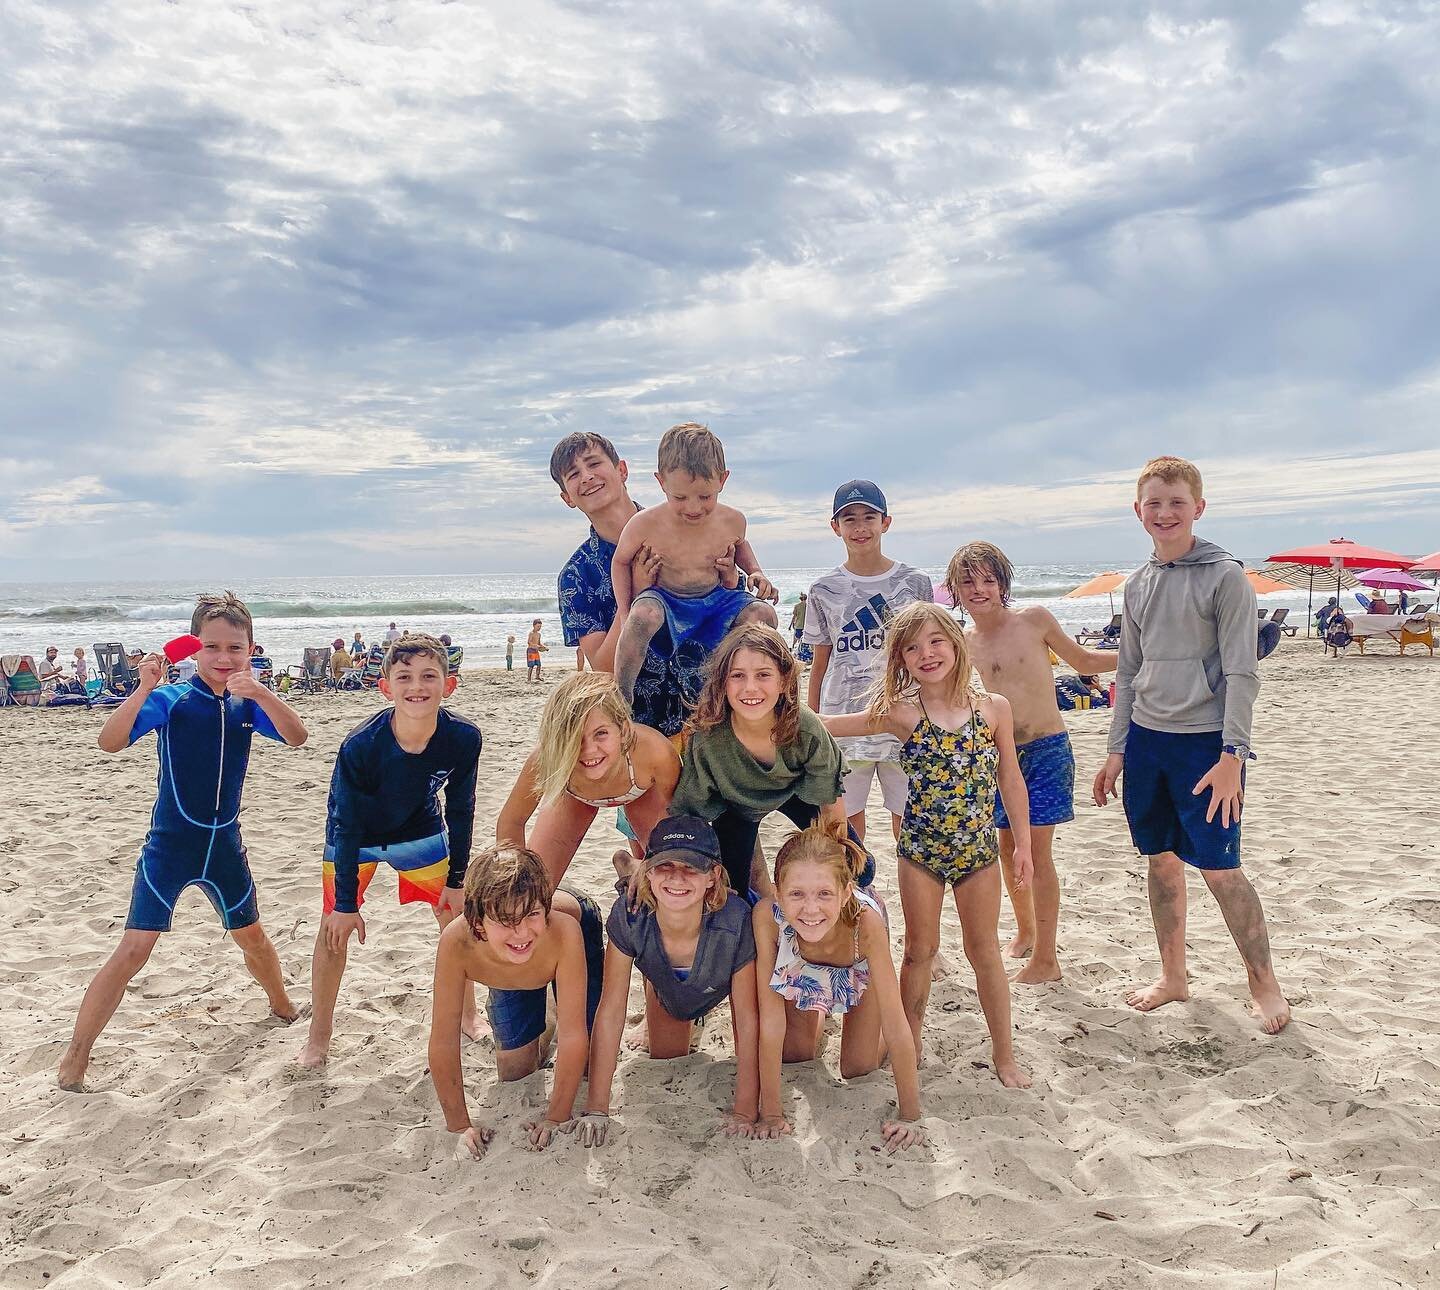 Cerritos Beach is full of families and kids. Some native locals, some once were tourists but fell in love and moved here permanently, and others live here seasonally or come whenever they can. You&rsquo;re guaranteed to find a kid gang to play with w